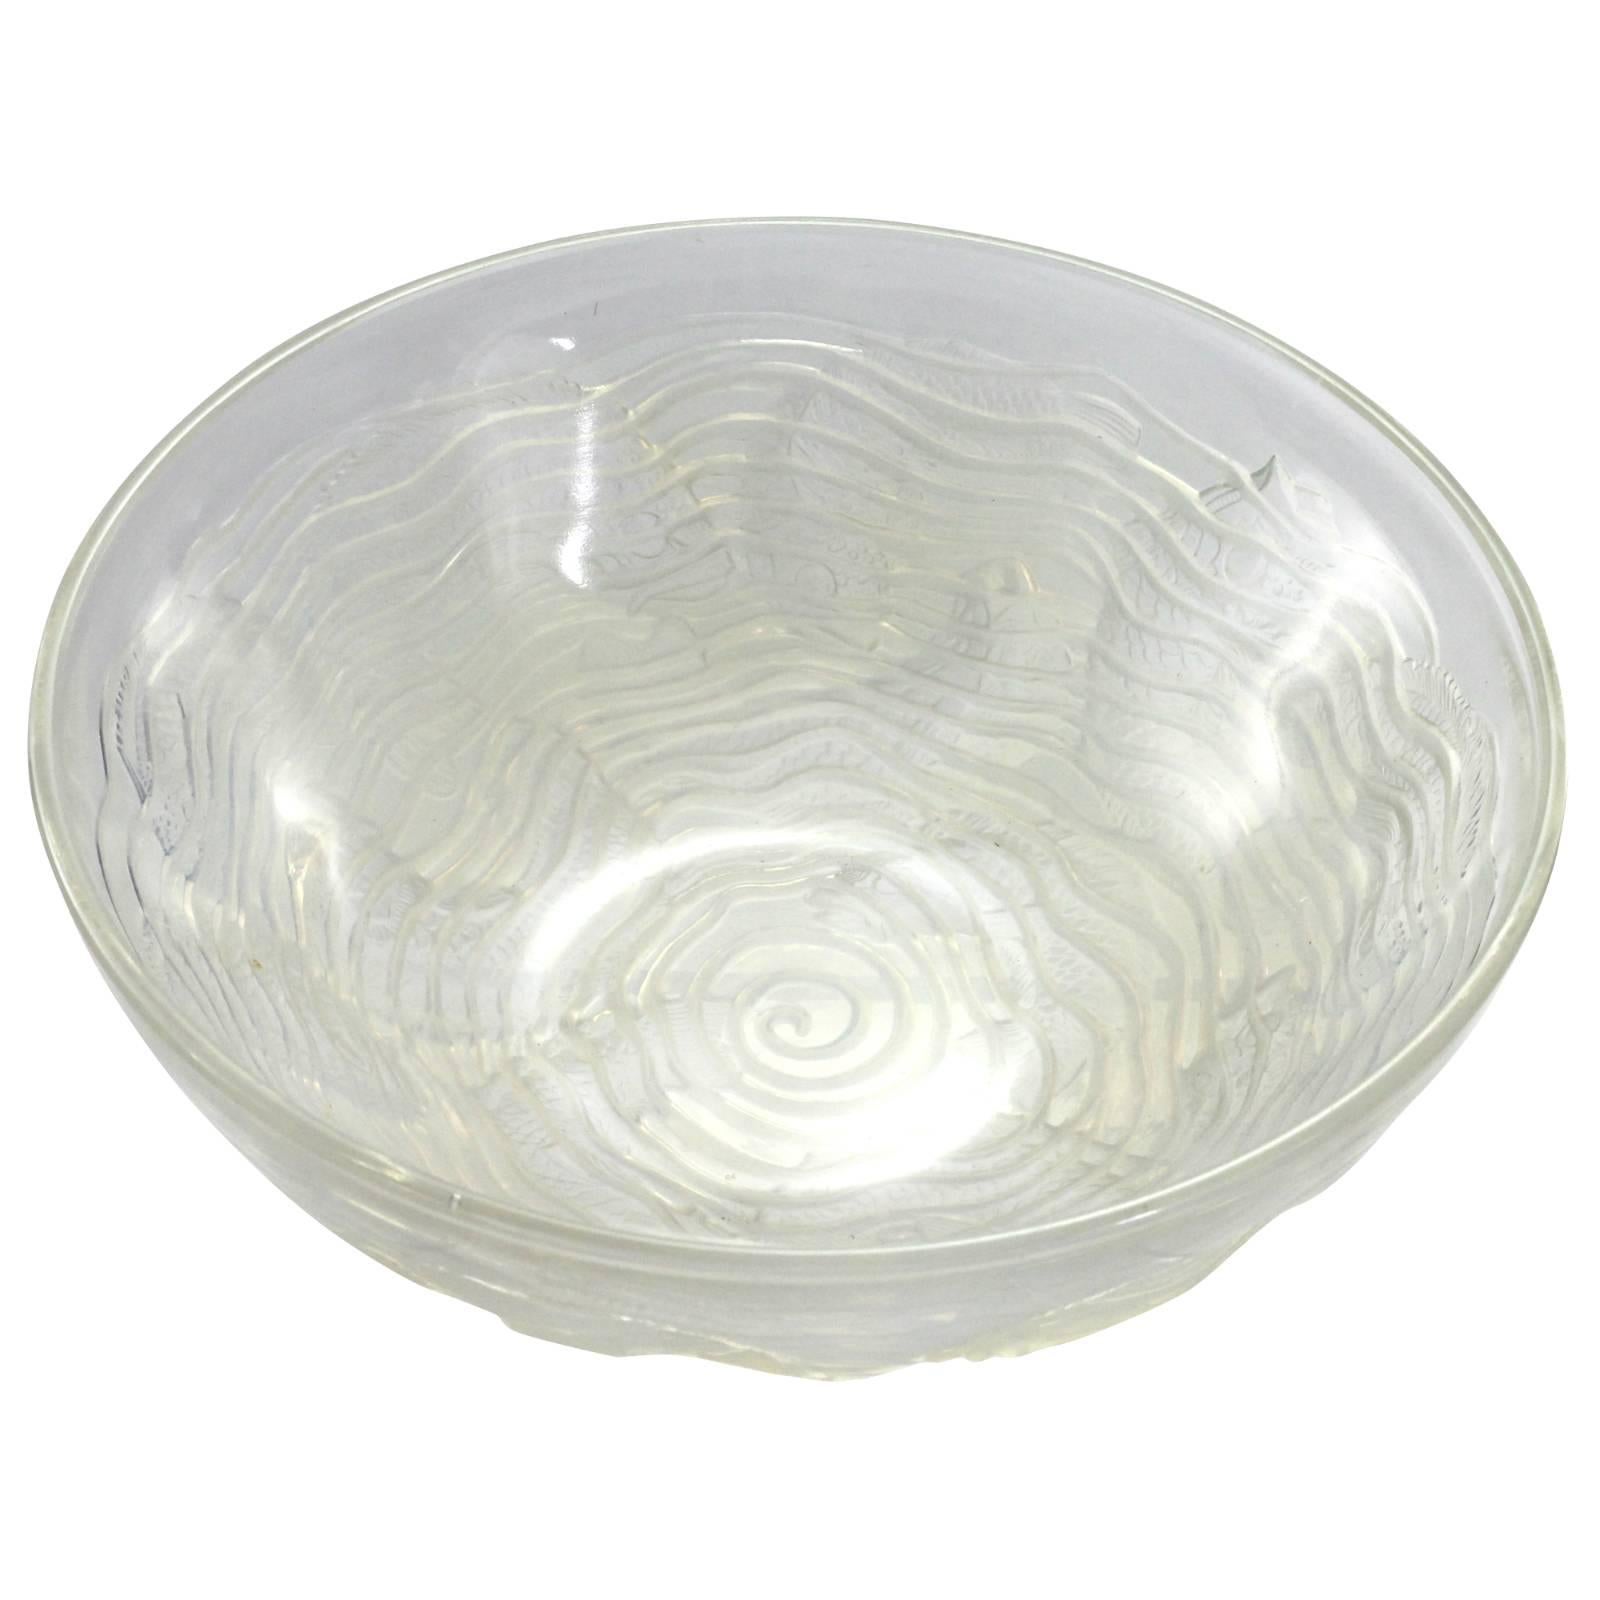 Early 20th Century Art Deco Opalescent Glass 'Dauphin' Bowl by René Lalique For Sale